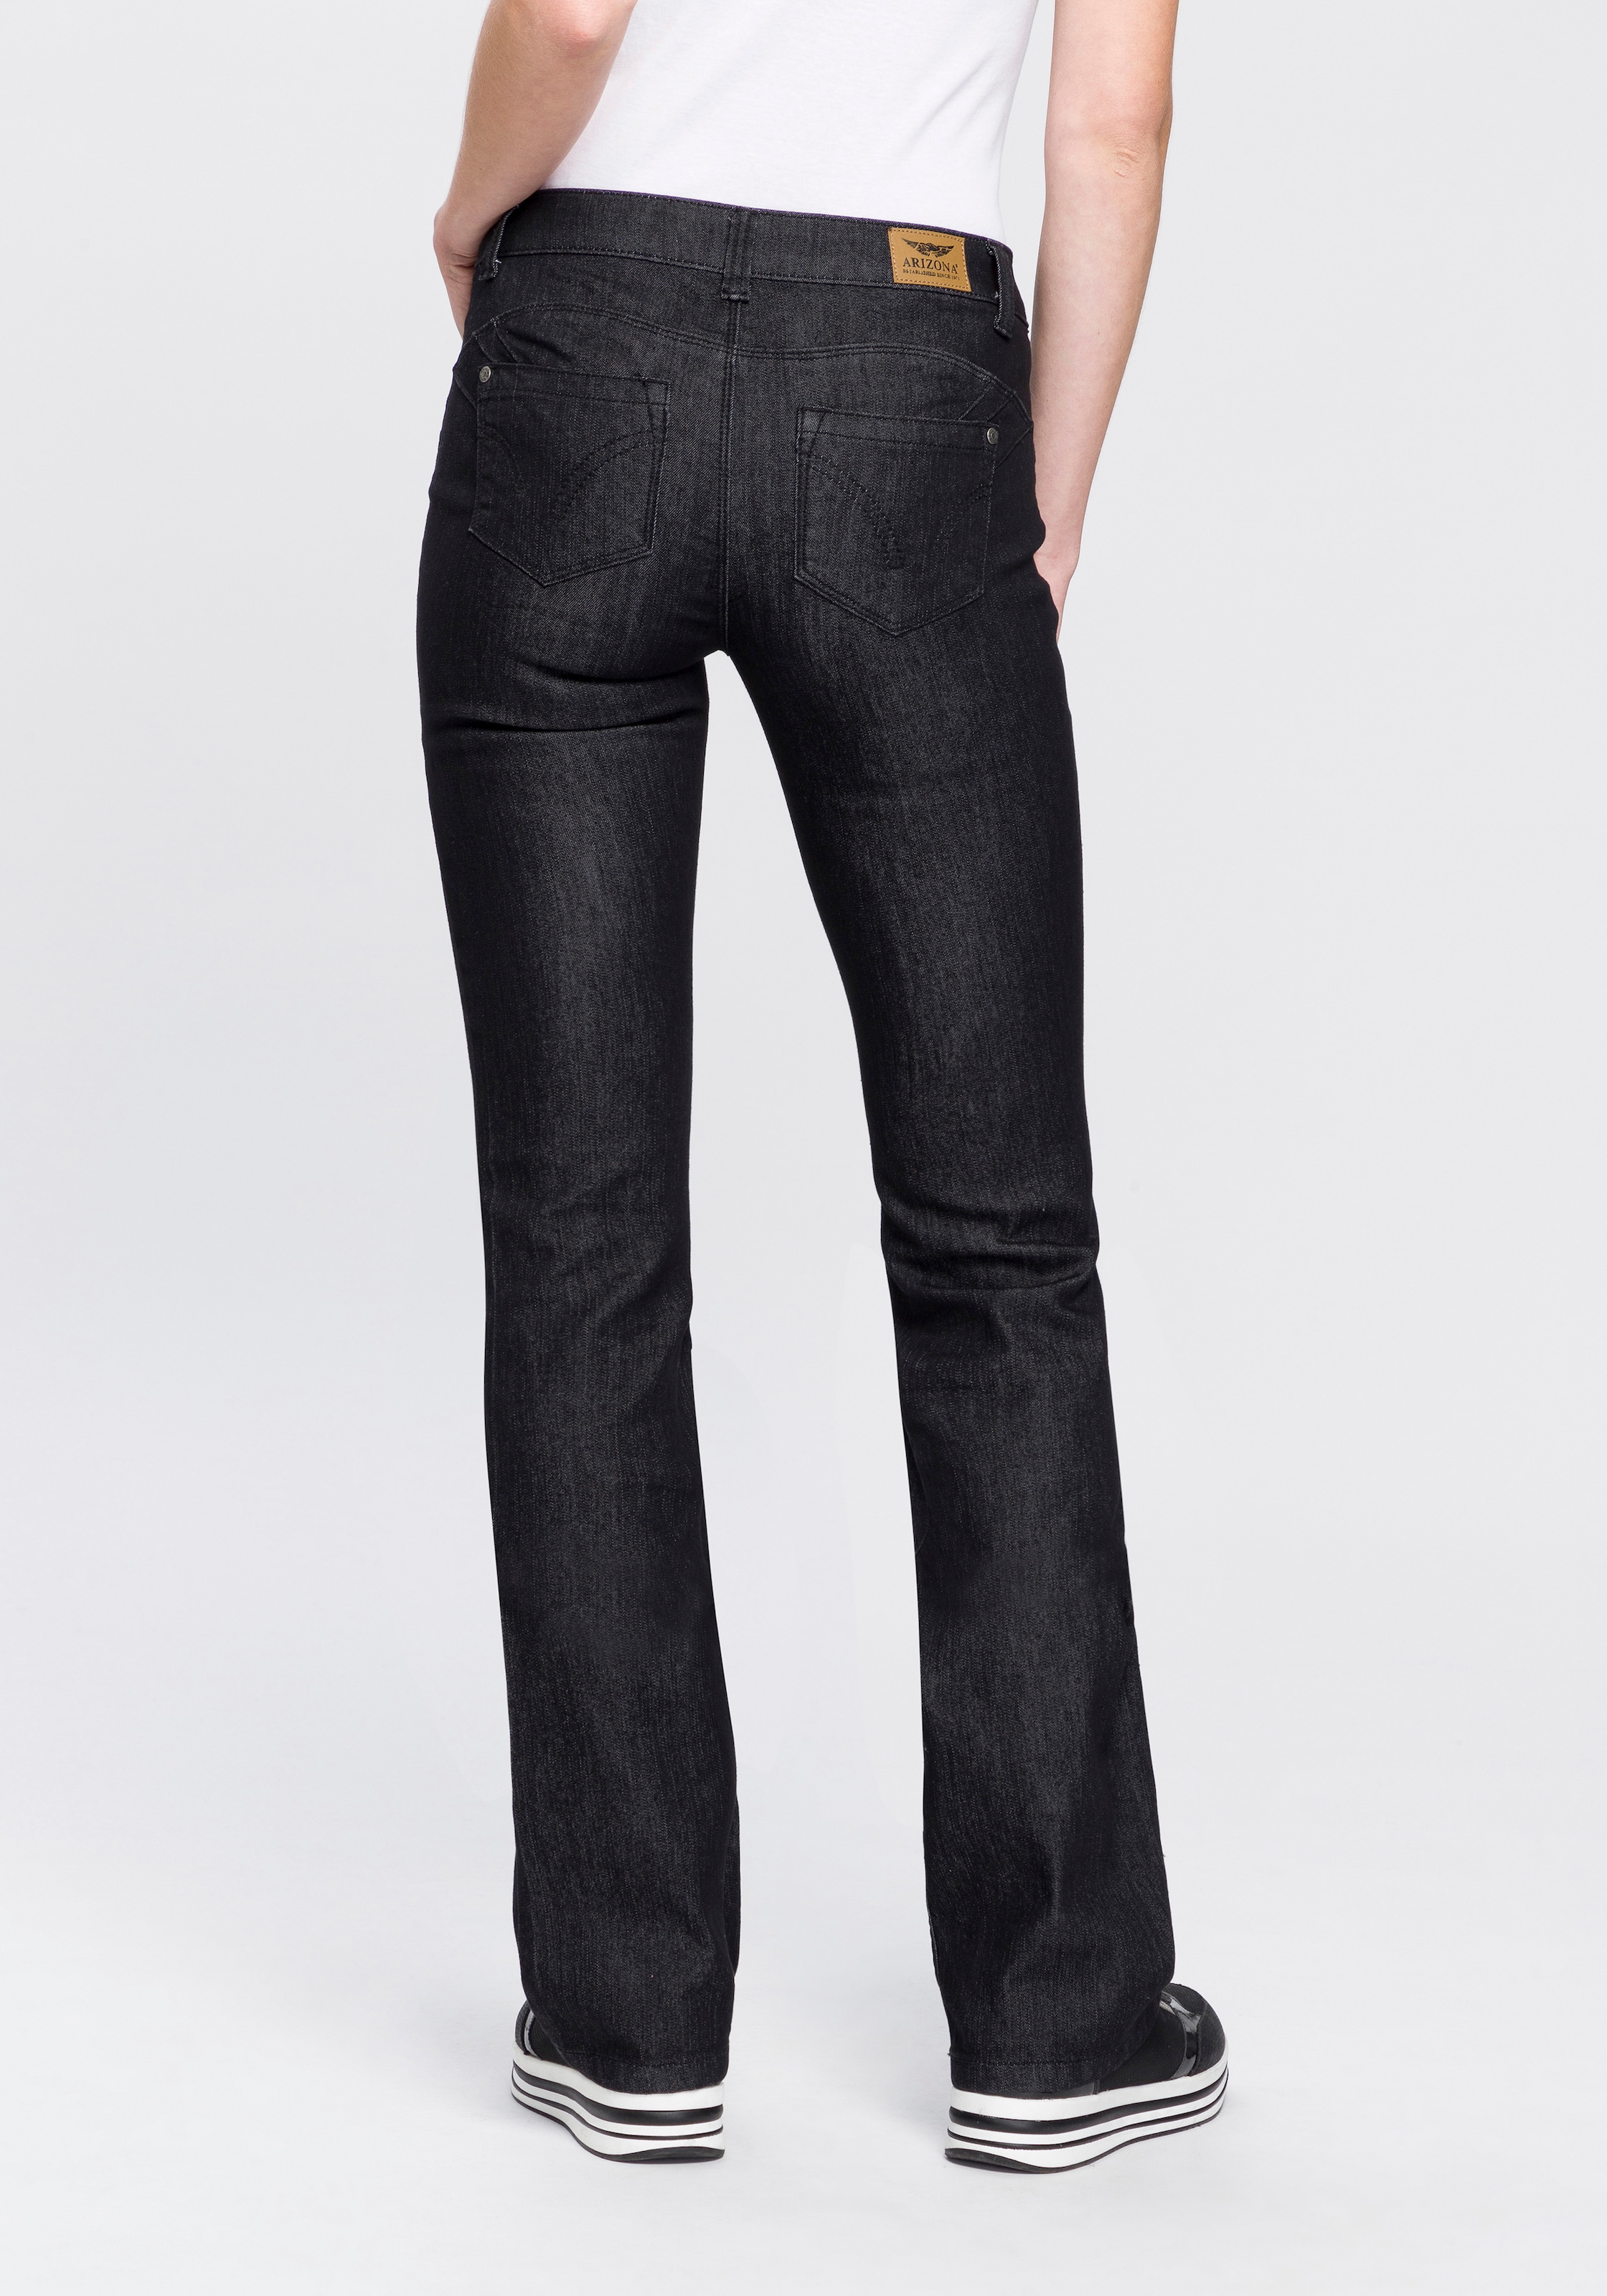 Bootcut-Jeans »Shaping«, Mid Waist